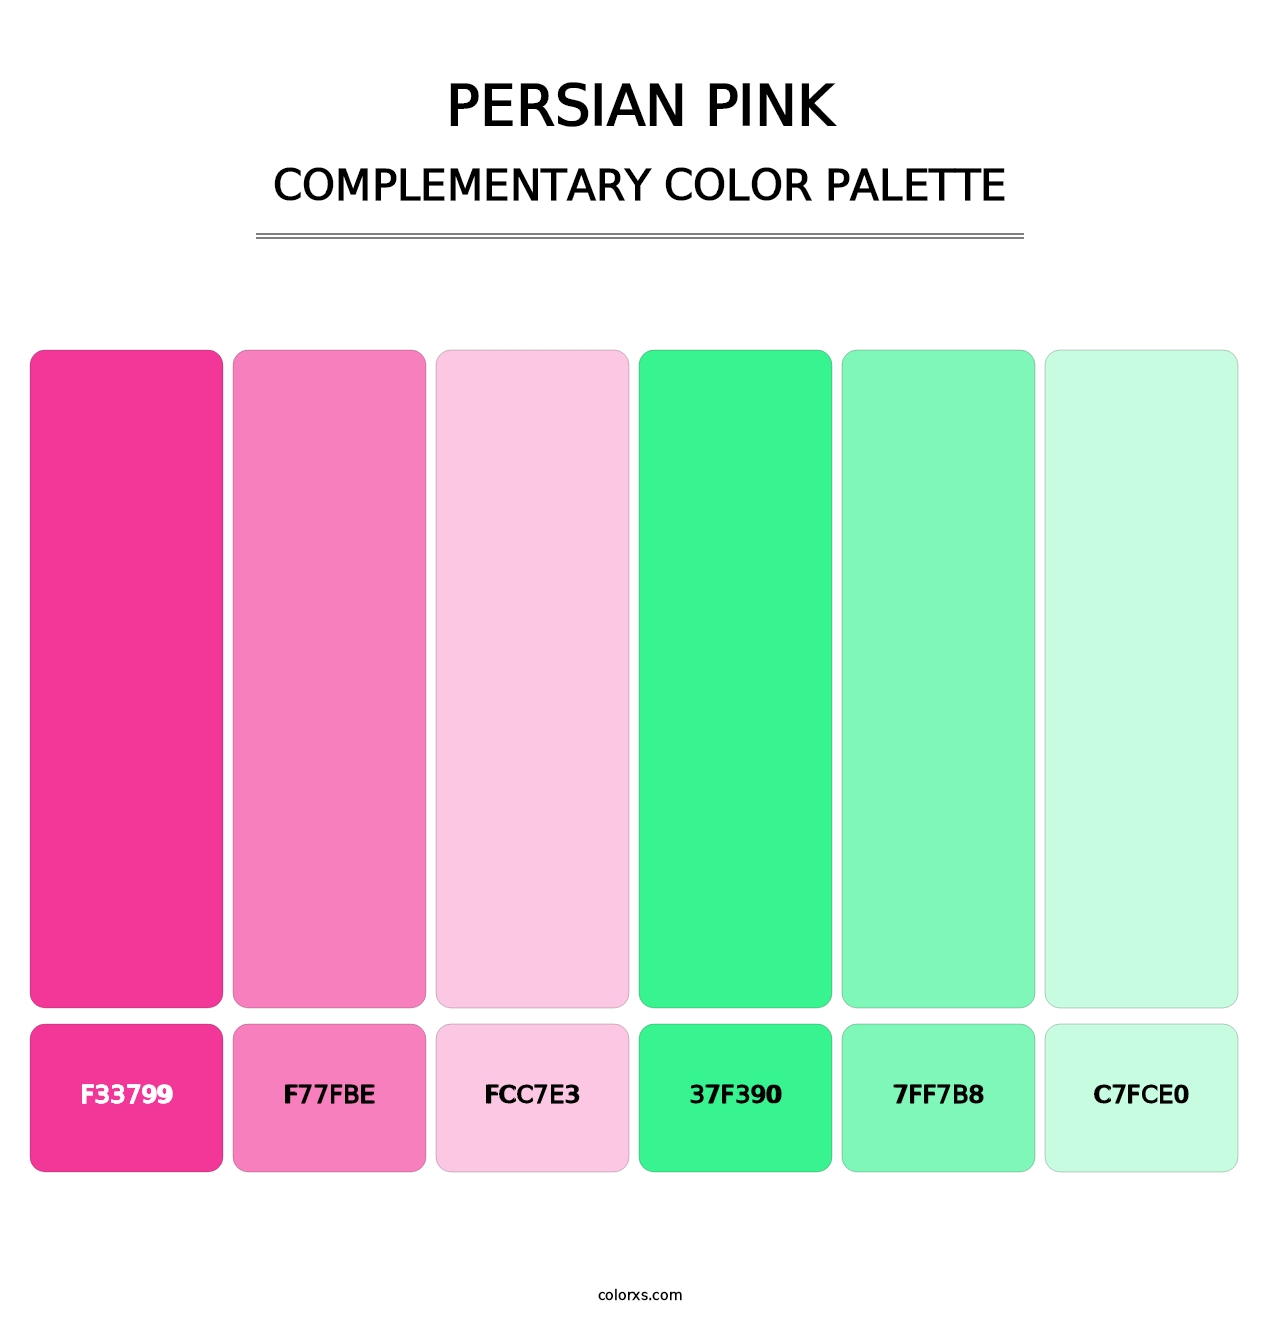 Persian Pink - Complementary Color Palette